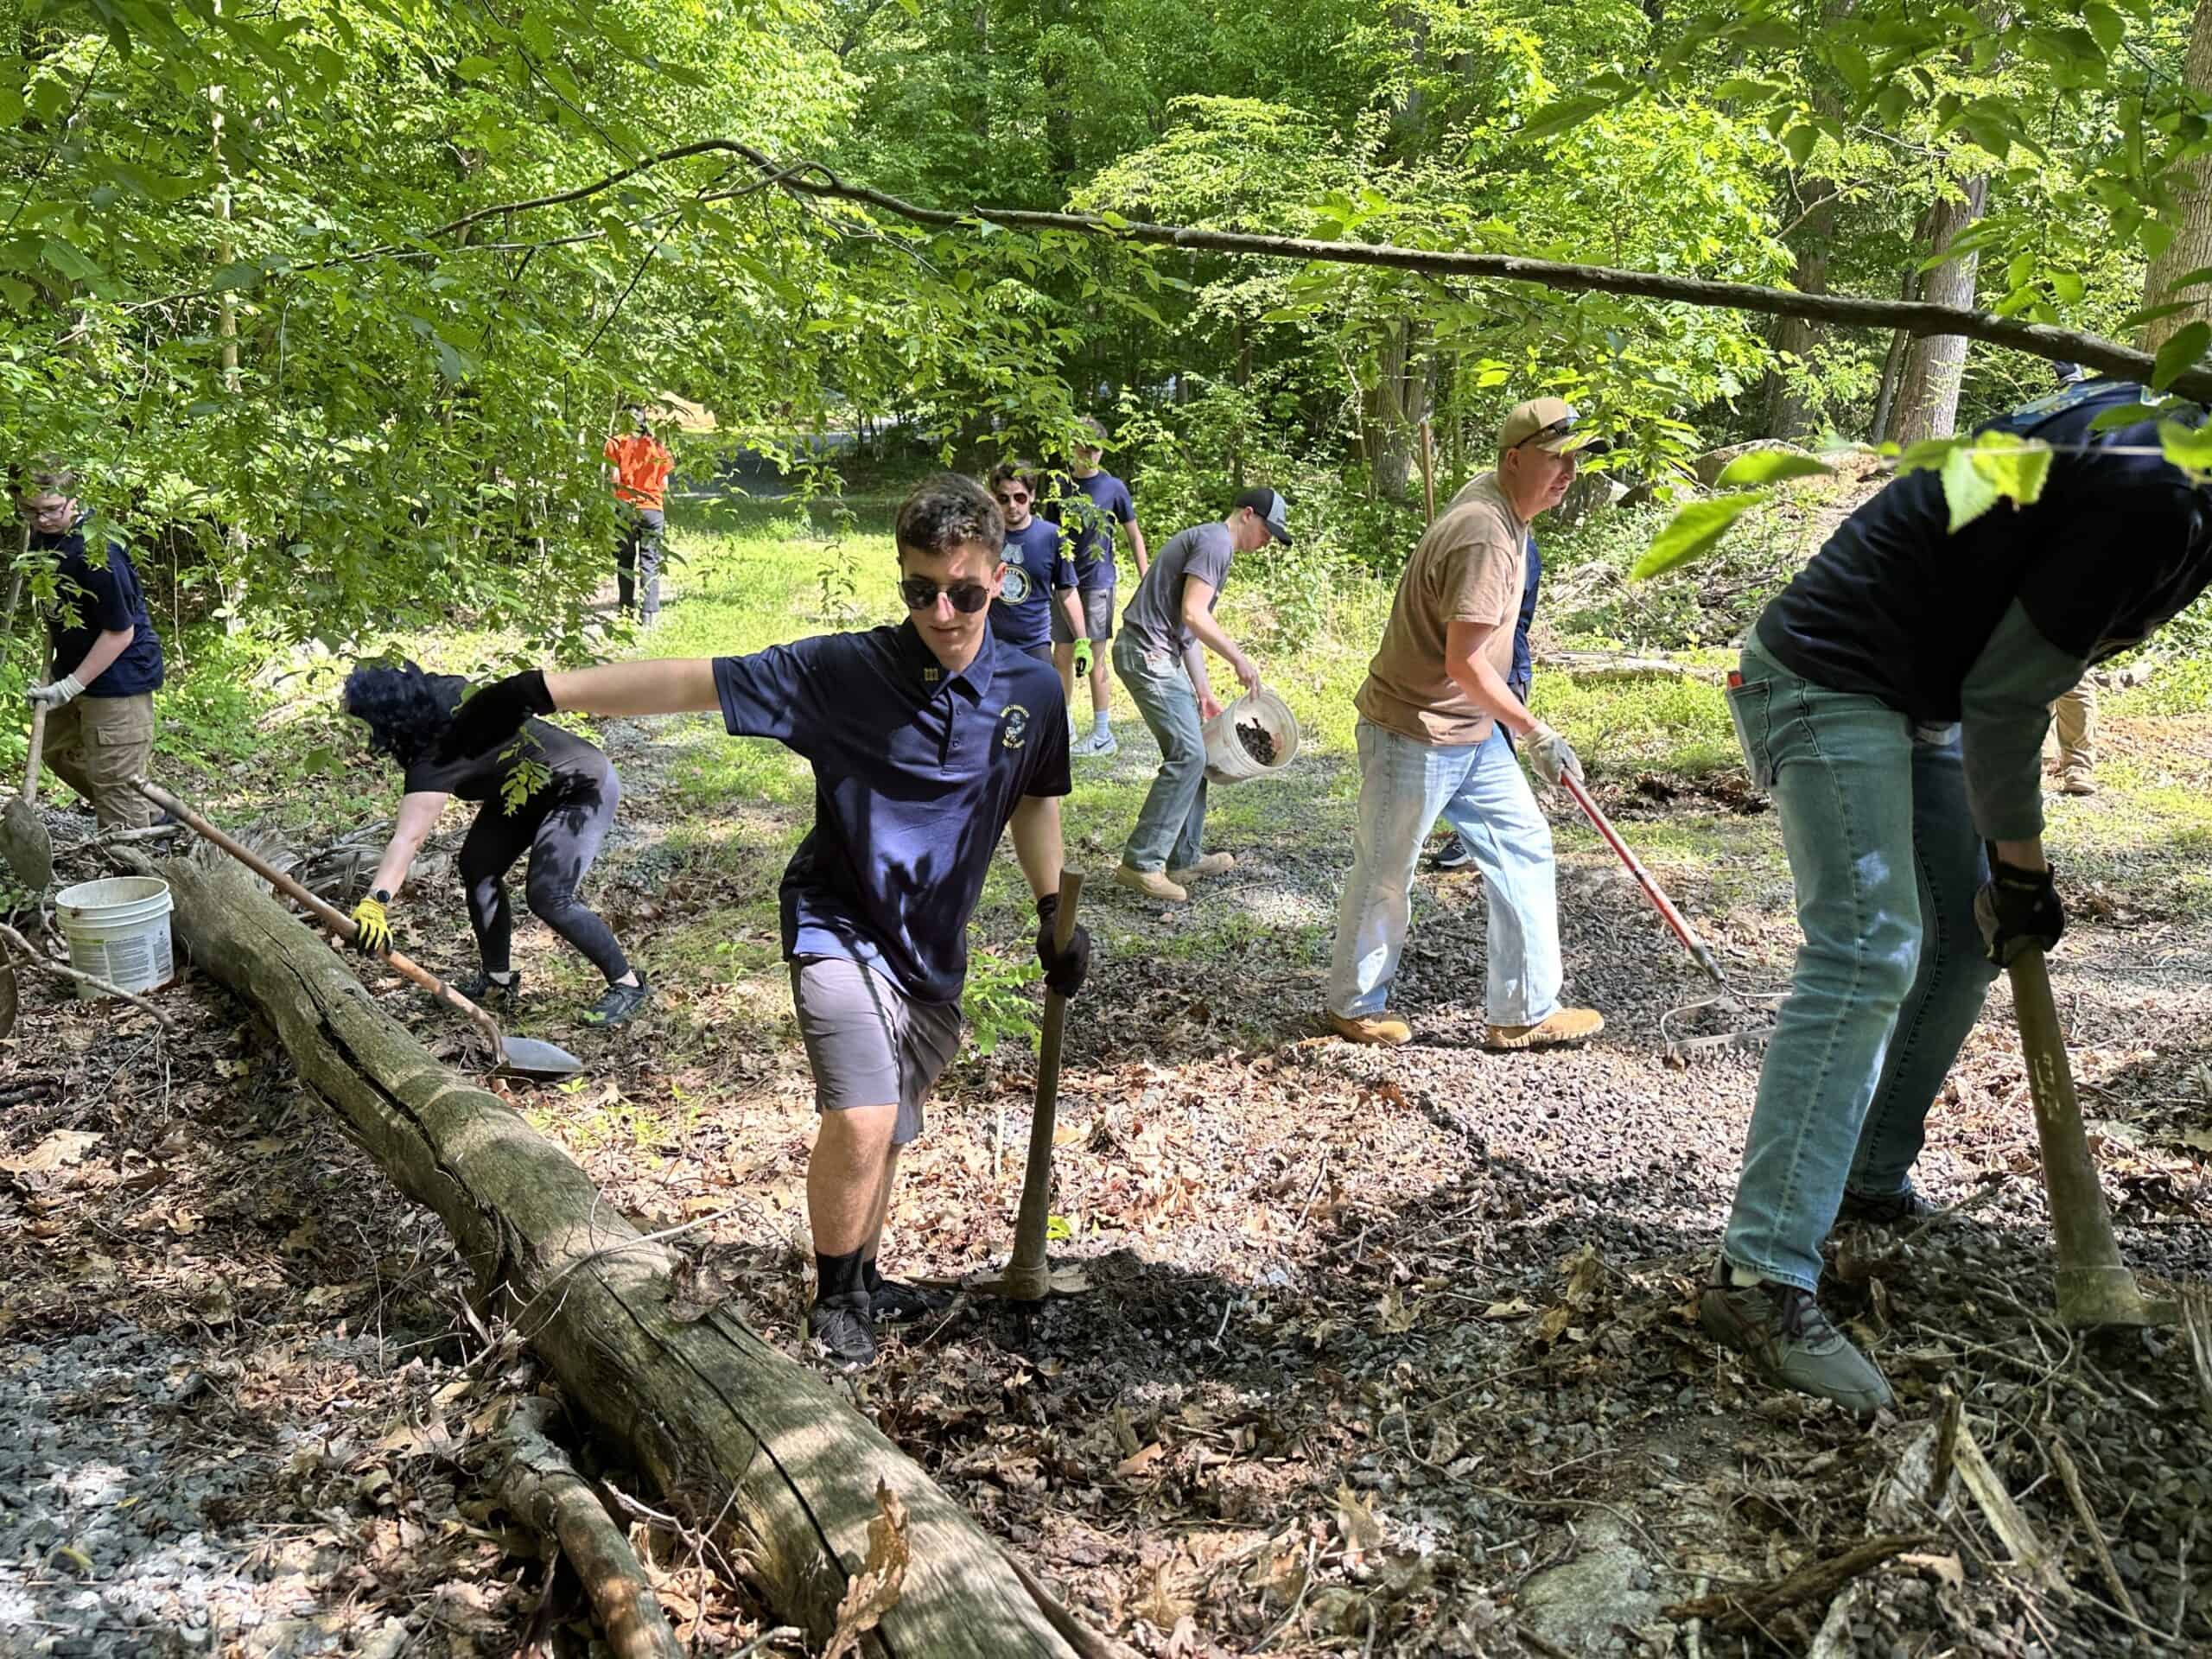 Owen J. Roberts JROTC students with rakes and shovels moving gravel in the woods